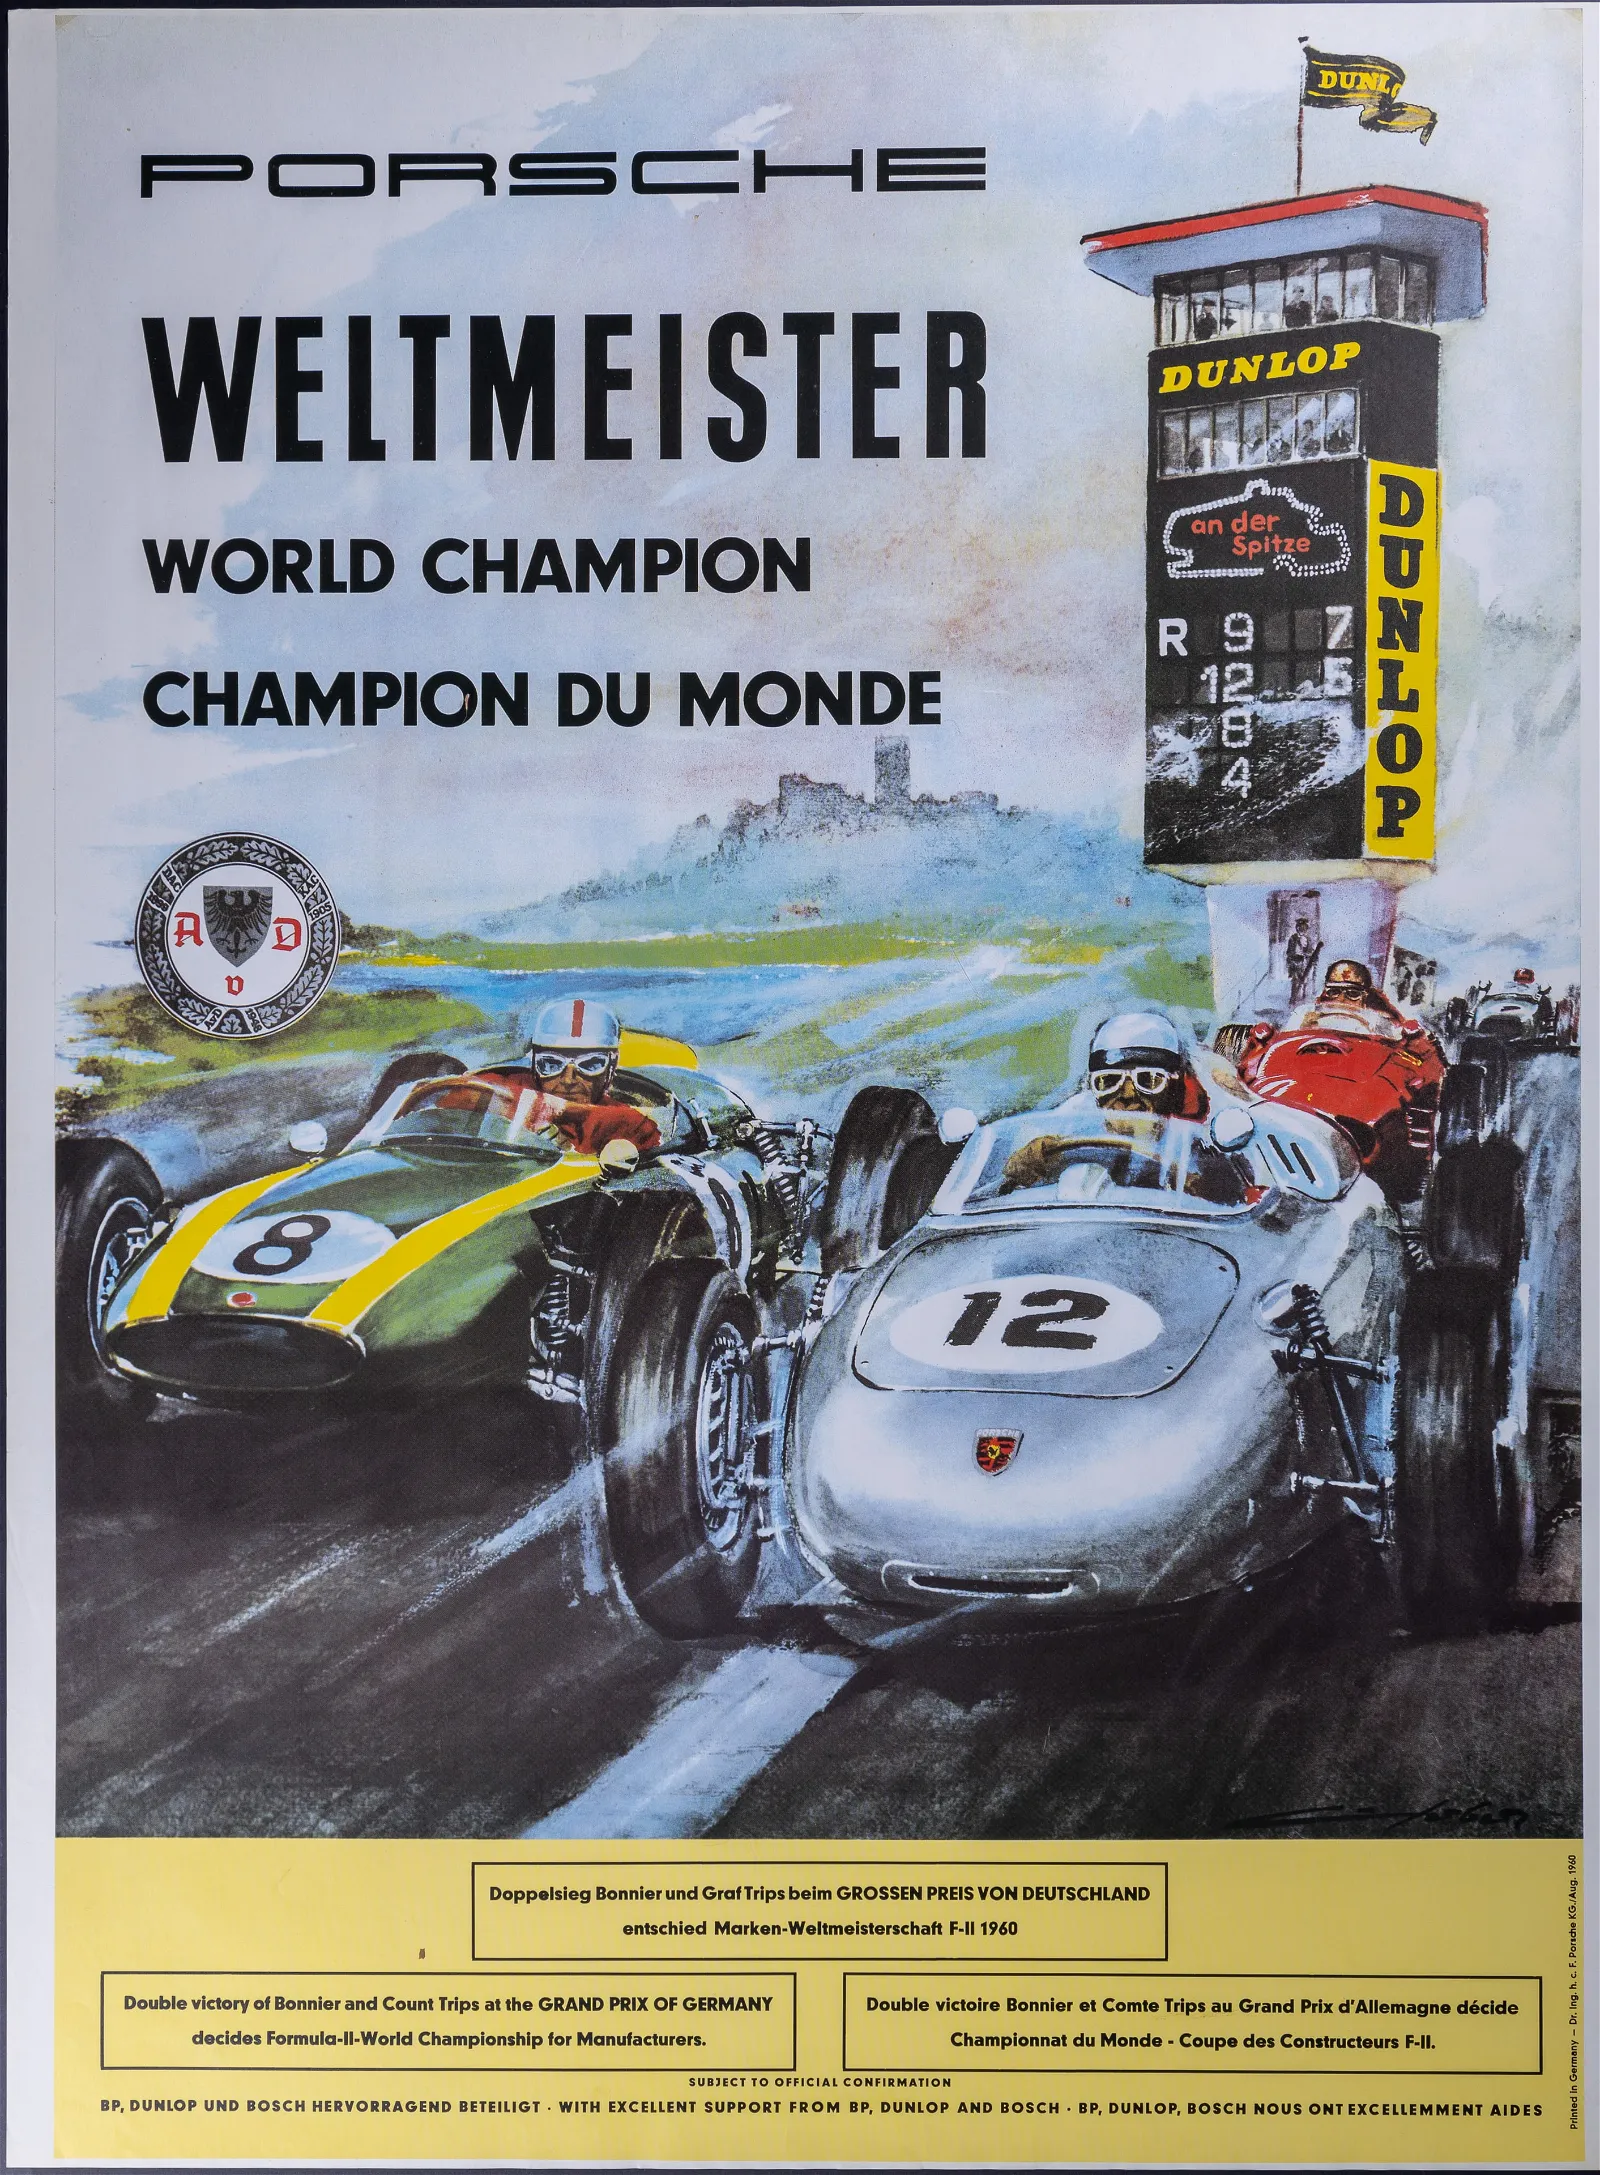 Vintage Porsche racing posters head to the finish line at Keystone Jan. 5